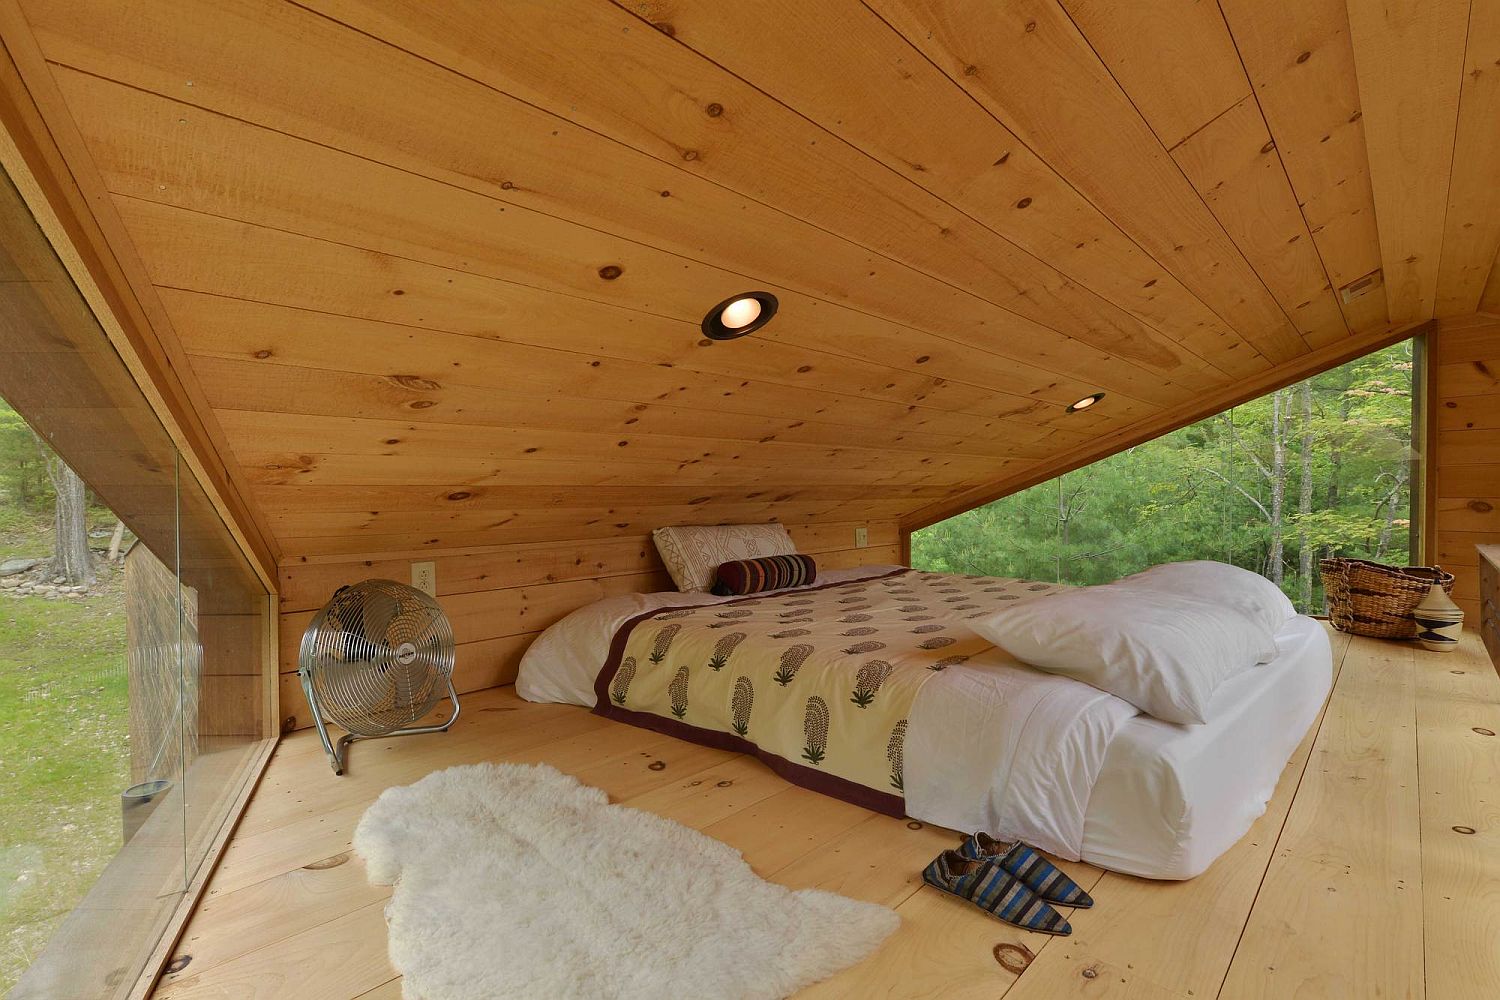 Cozy and minimal loft level bedroom of the treehouse